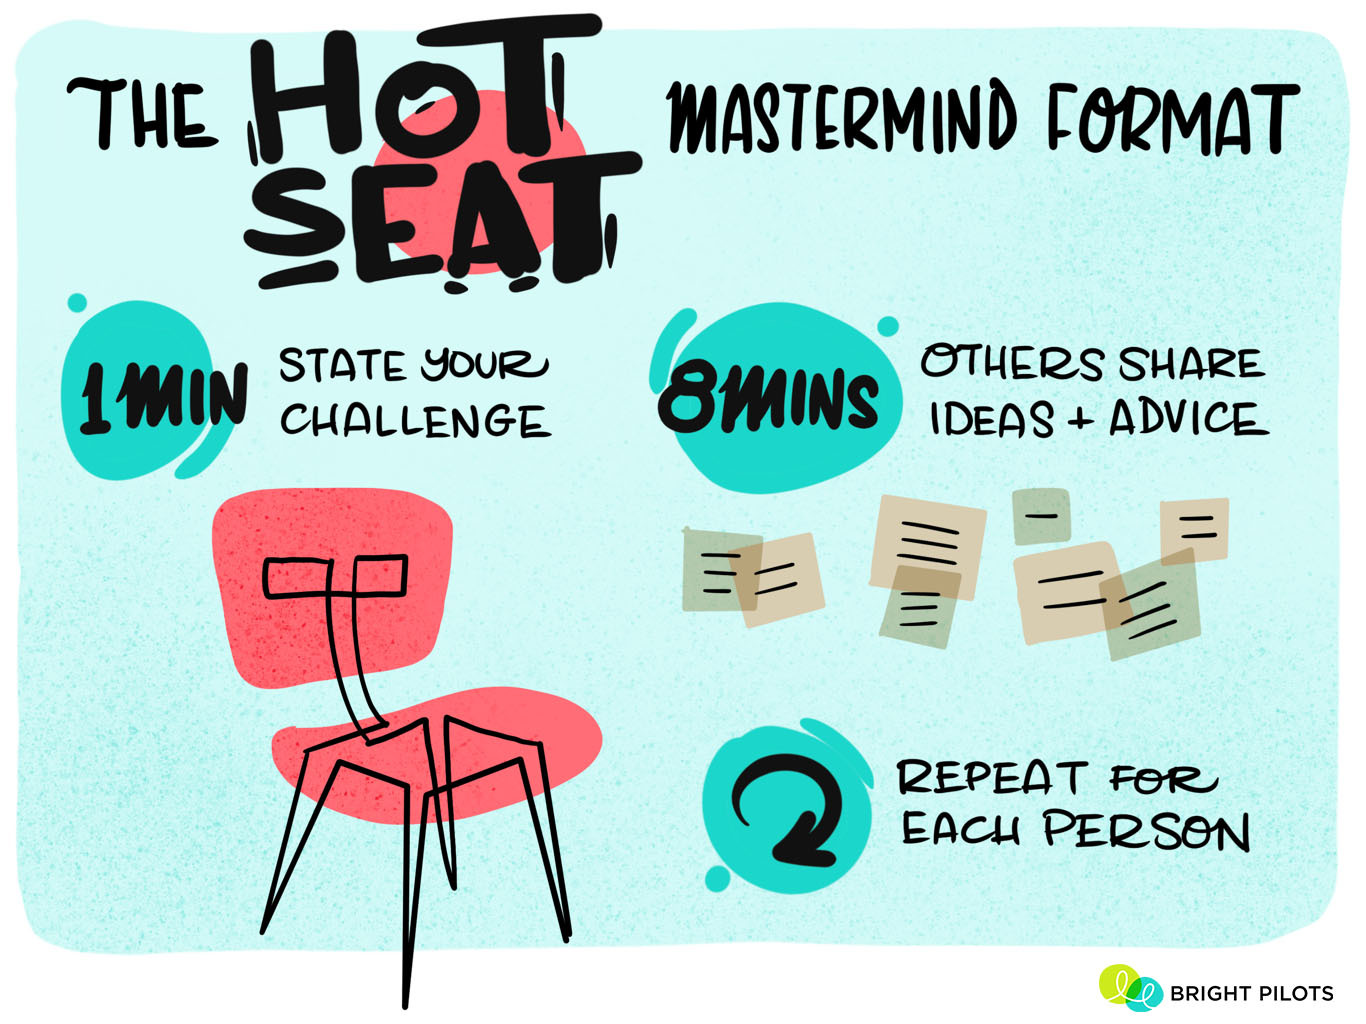 A picture describing the mastermind hot seat format